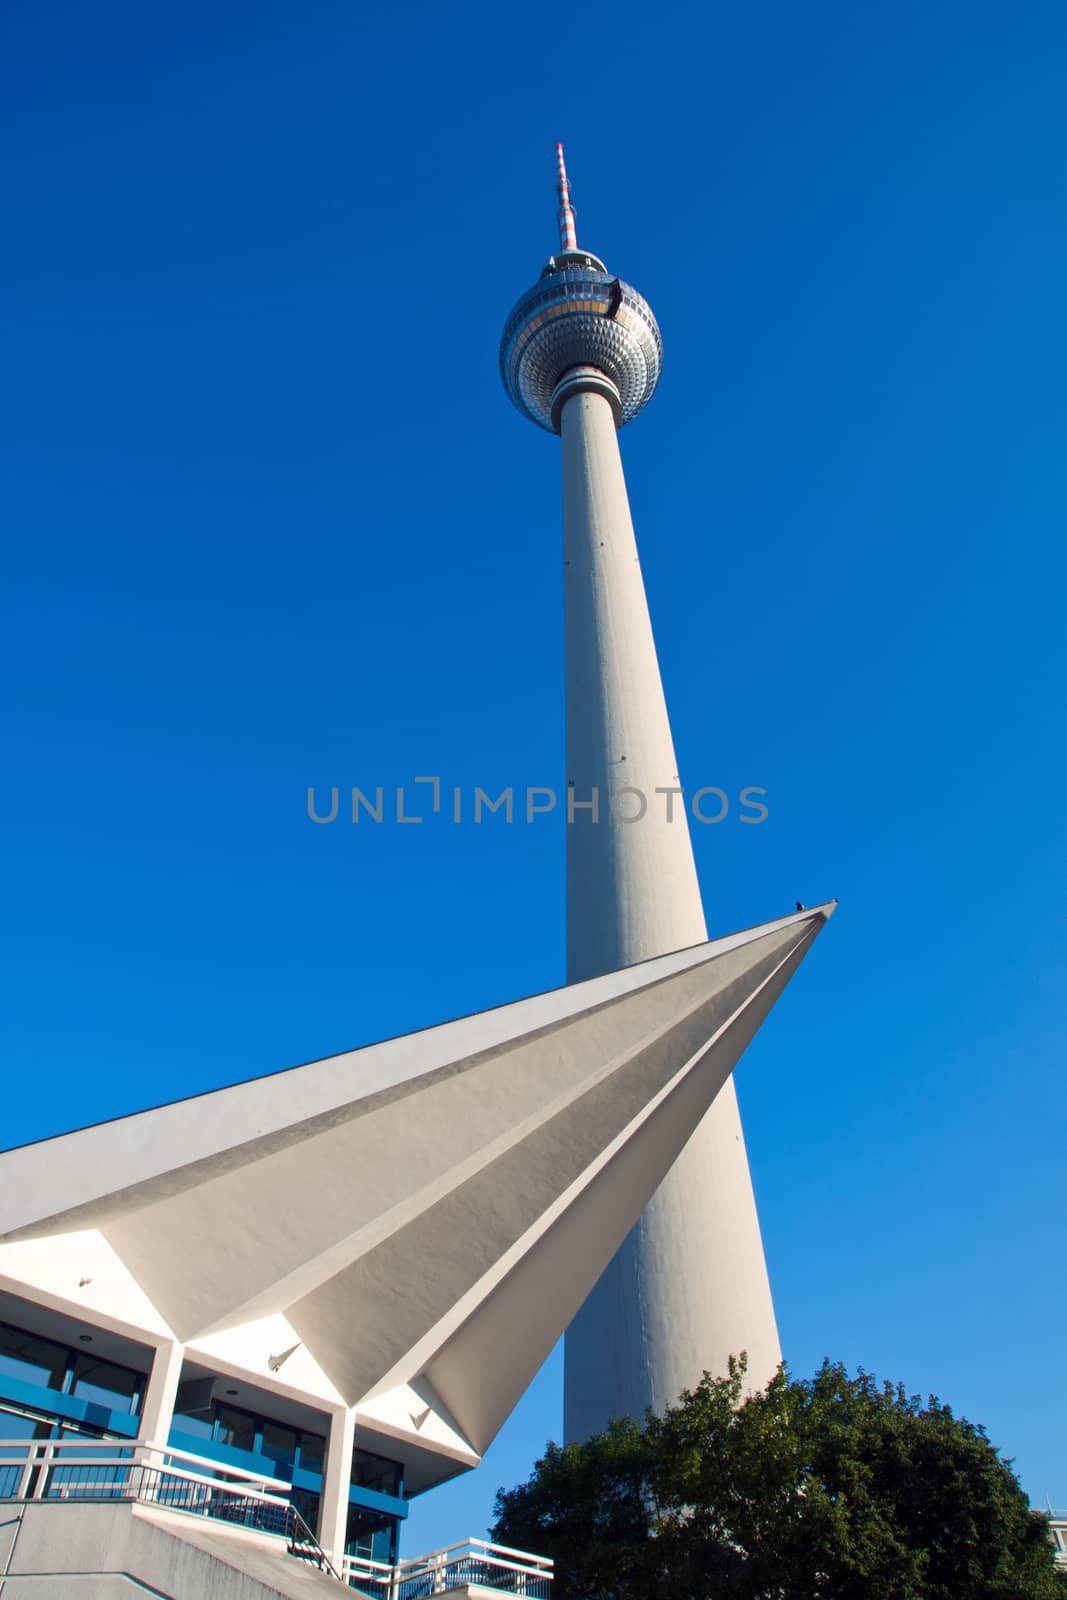 Television tower in Berlin by elxeneize